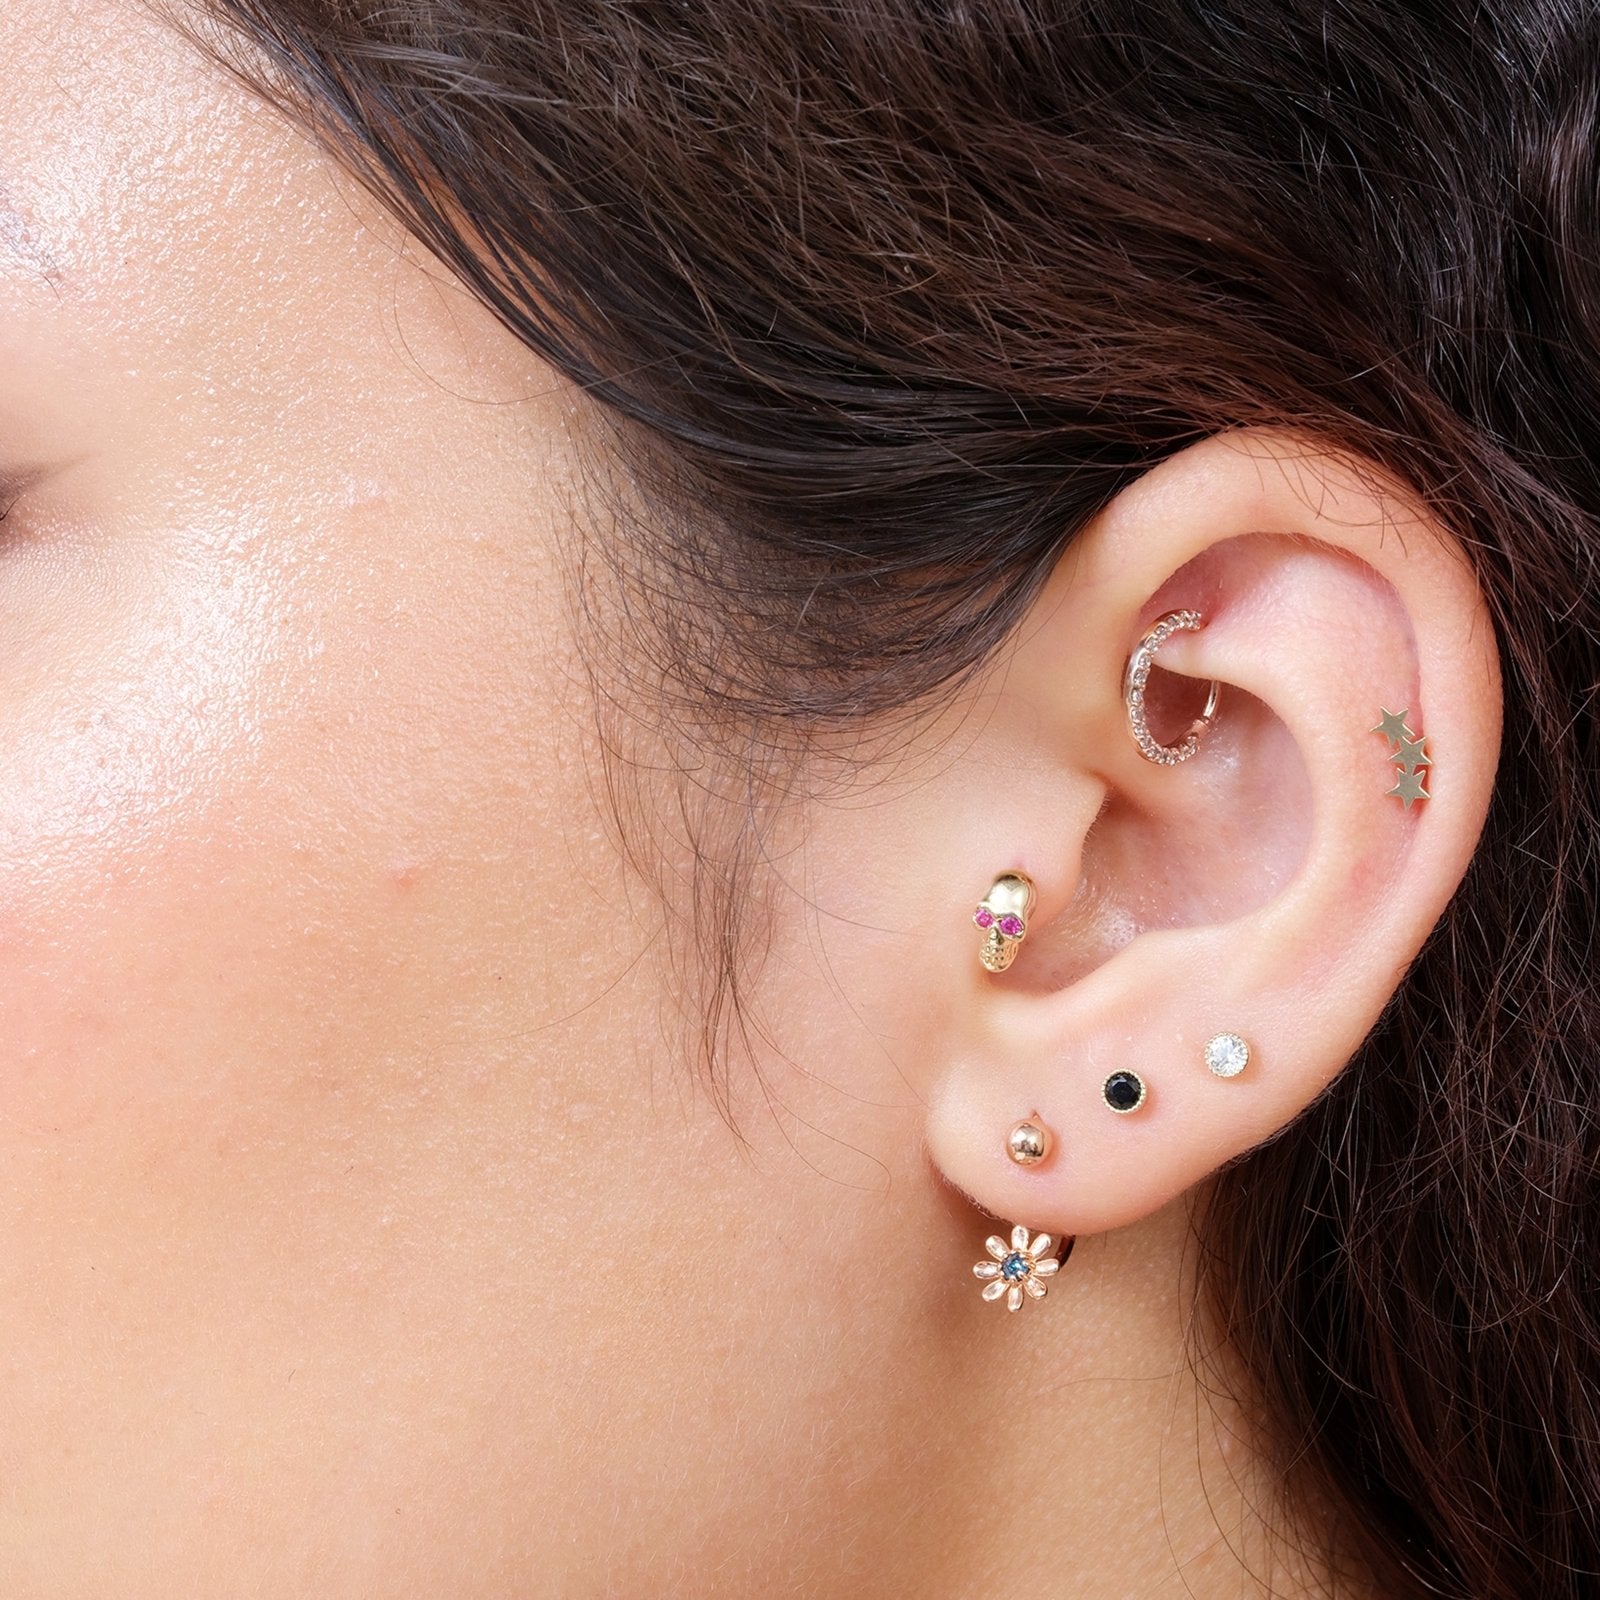 Three Star Flat Back Ear Climber Earrings Estella Collection #product_description# 17923 14k Cartilage Earring Cartilage Earrings #tag4# #tag5# #tag6# #tag7# #tag8# #tag9# #tag10# 5MM